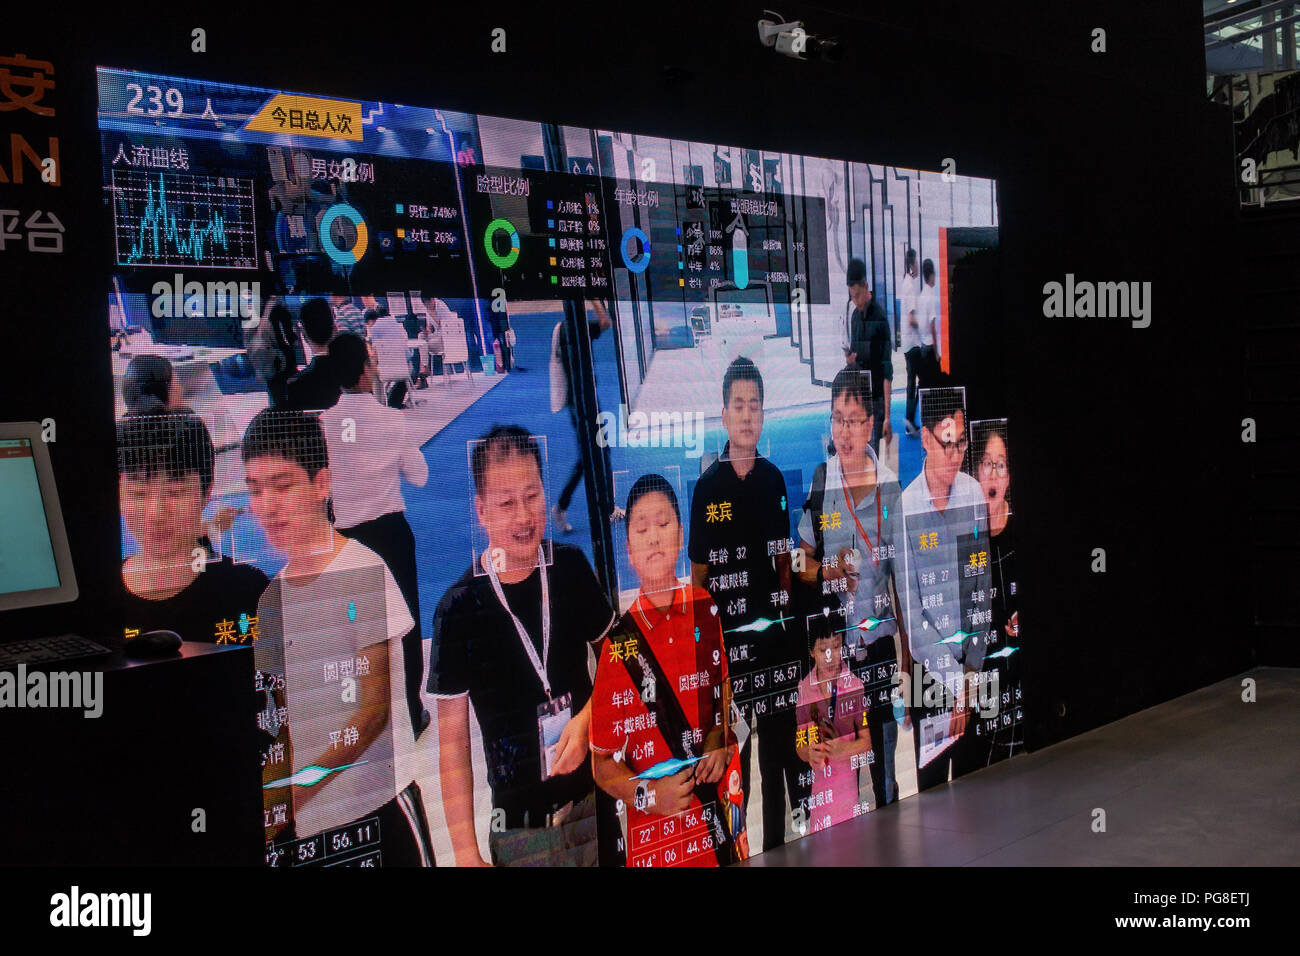 Face monitoring and surveillance technology exhibit at a Smart City Expo in Shenzhen, China. Stock Photo